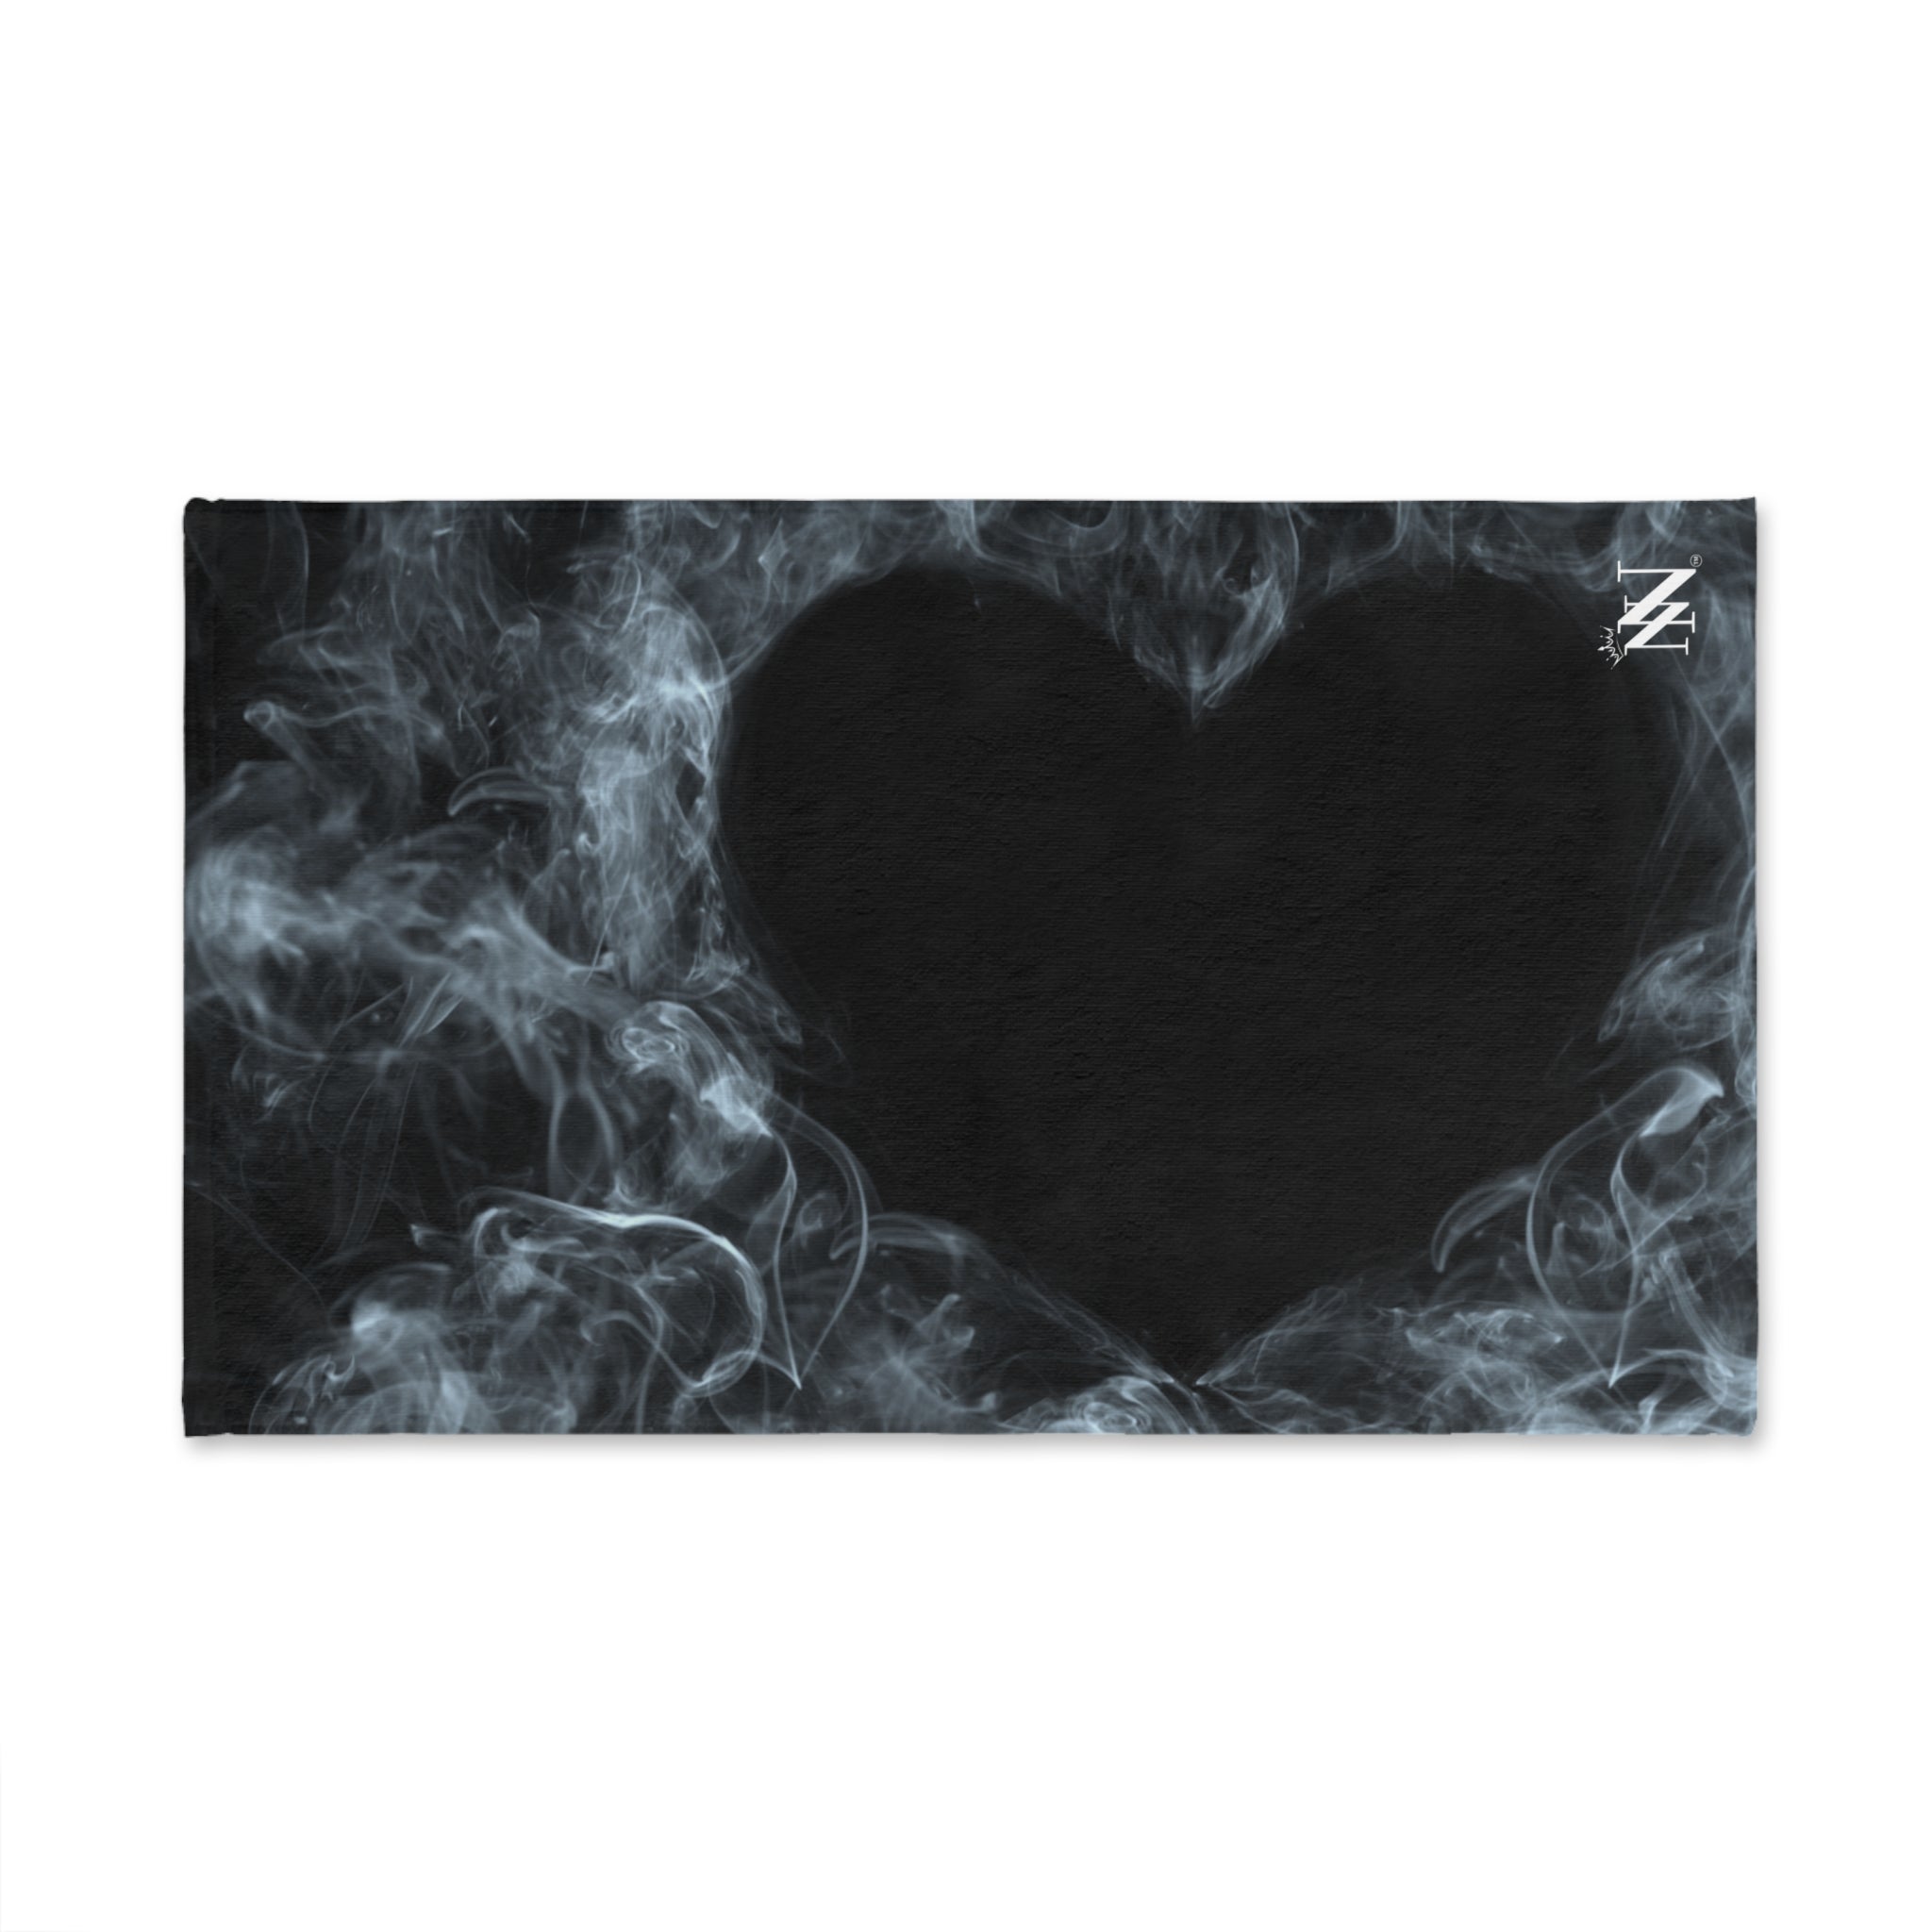 Heart Smoke Ring White | Funny Gifts for Men - Gifts for Him - Birthday Gifts for Men, Him, Her, Husband, Boyfriend, Girlfriend, New Couple Gifts, Fathers & Valentines Day Gifts, Christmas Gifts NECTAR NAPKINS